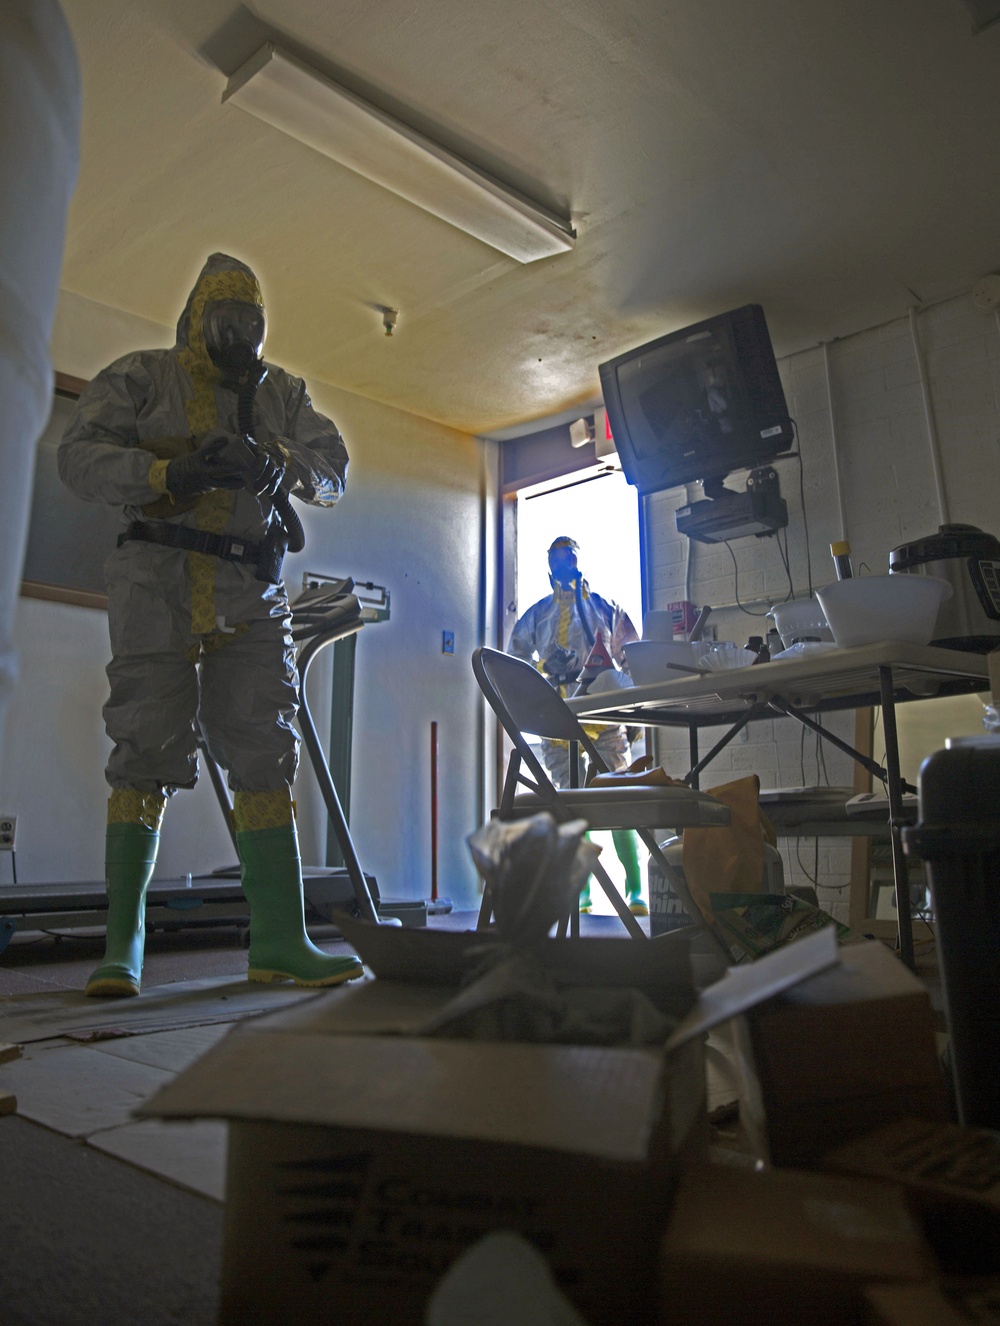 Breaking Bad with EOD – The Military’s Bomb Squad